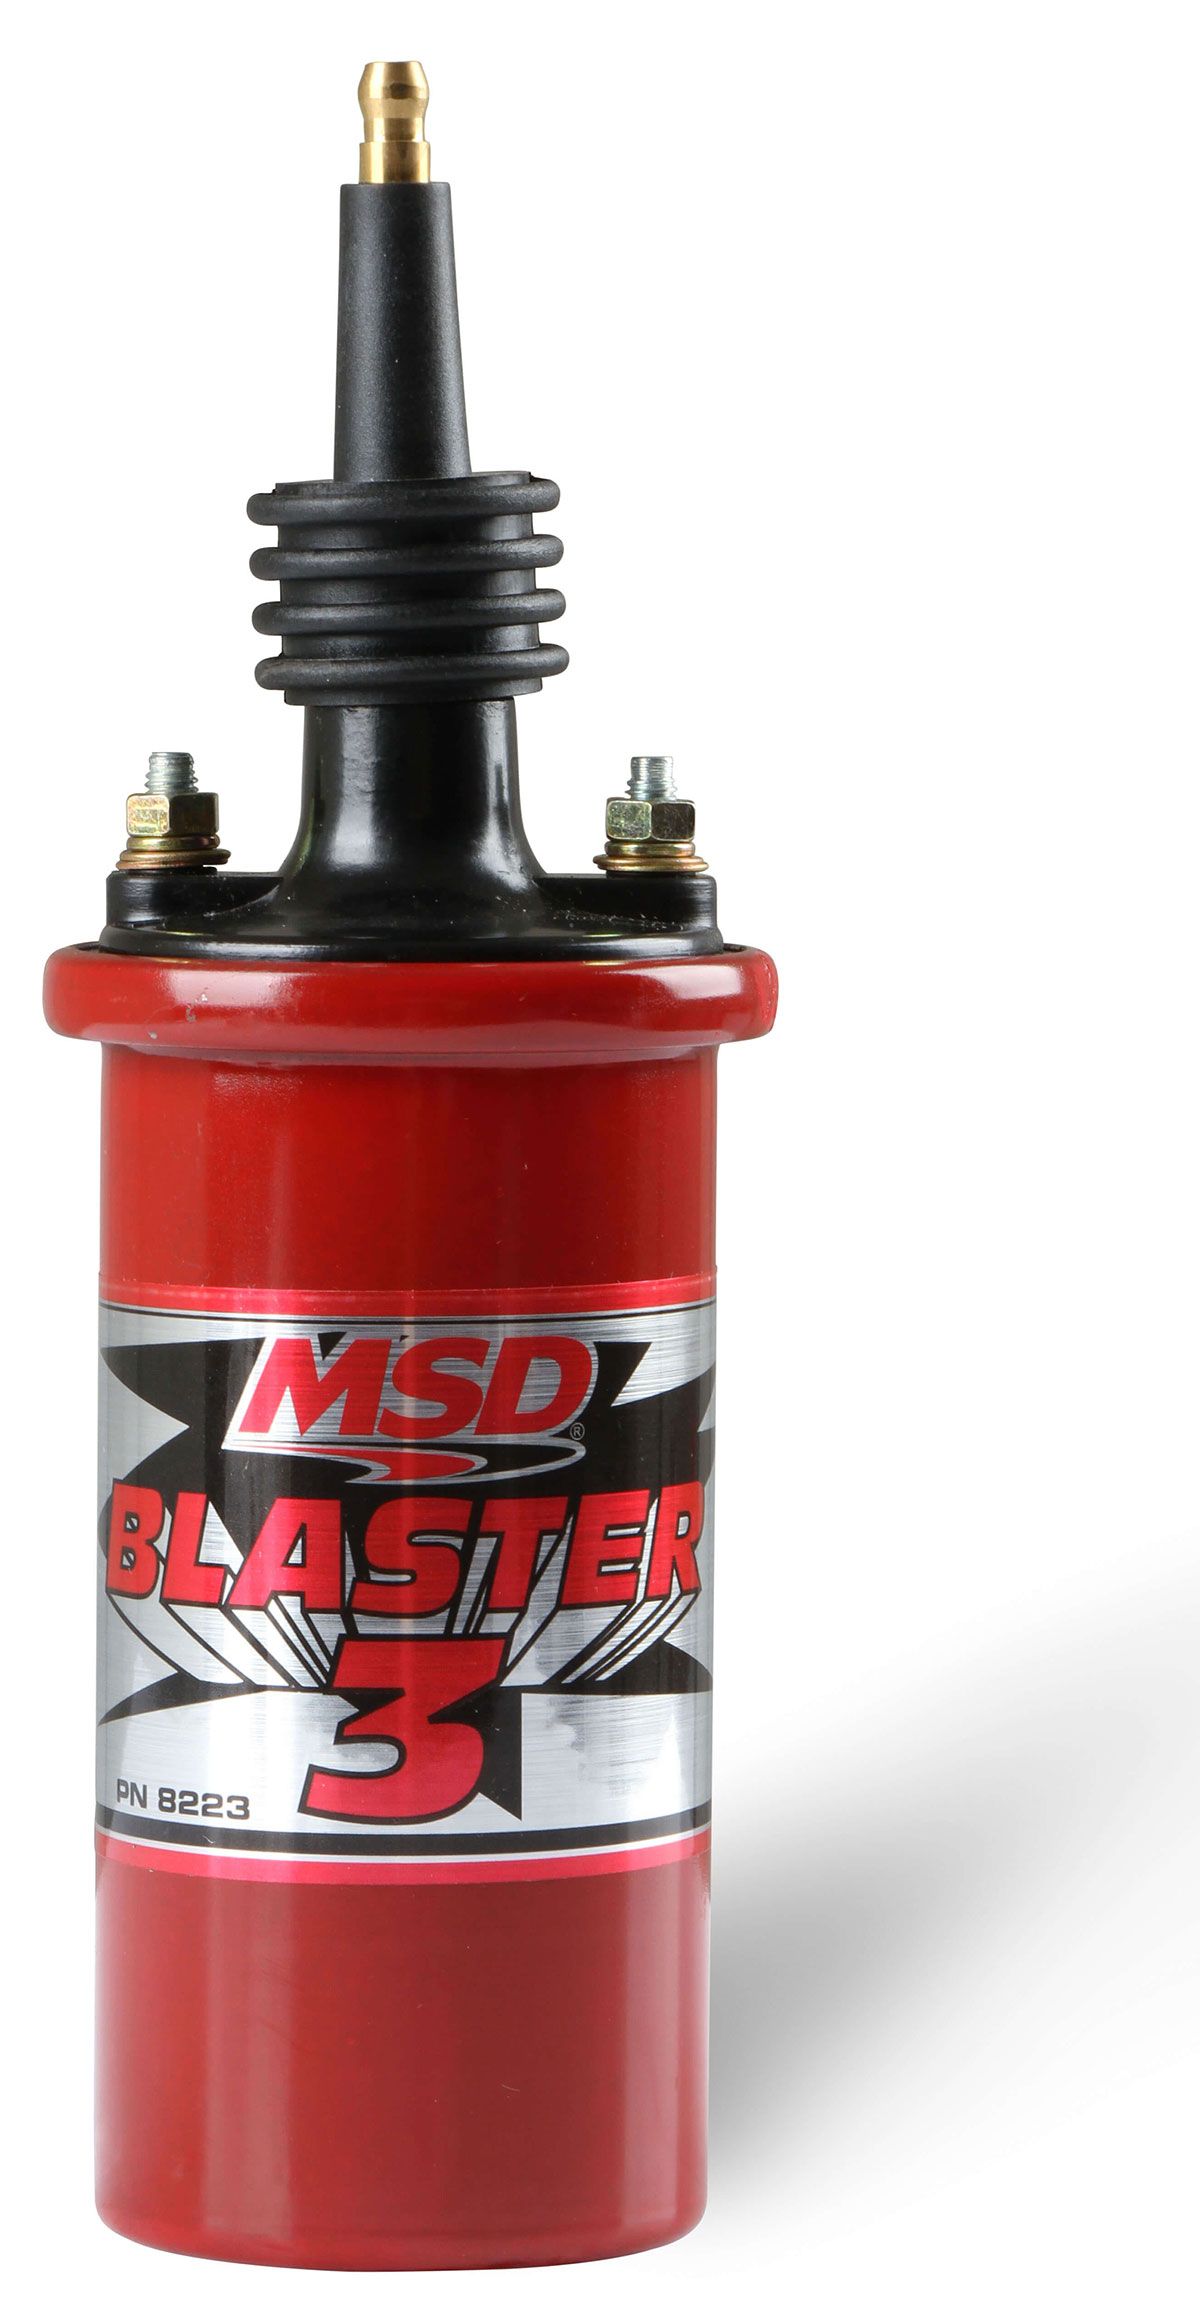 Blaster 3 Coil Red, 45,000 volts